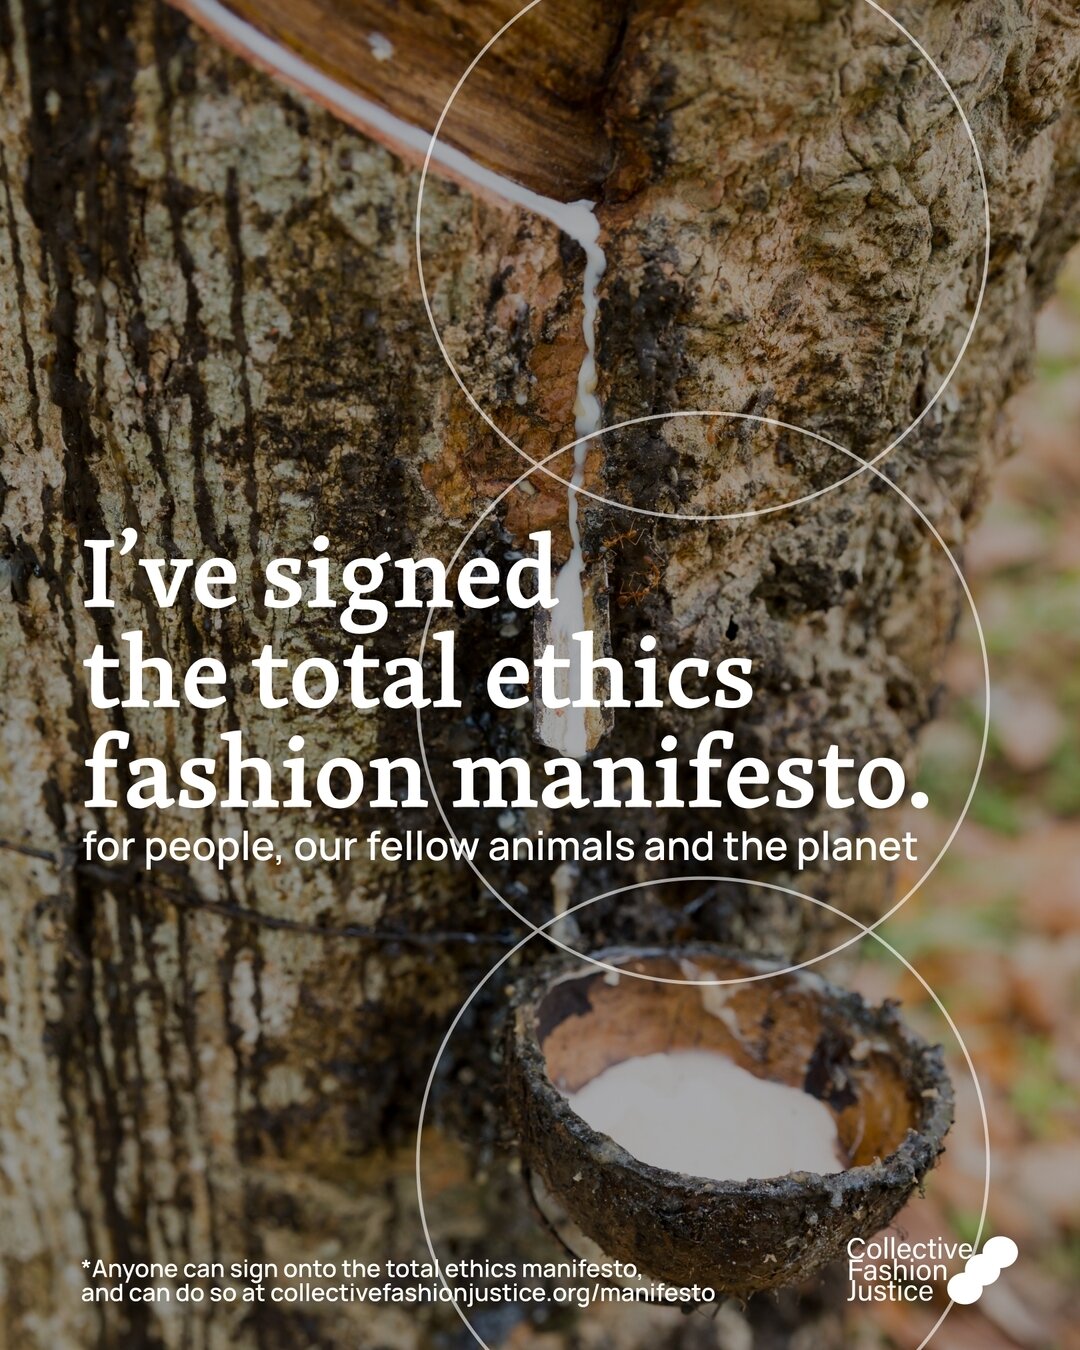 Super proud to have signed the Total Ethics Manifesto, endorsed by the amazing @collectivefashionjustice. I try to keep things as positive as possible on here, but I must admit to becoming a bit downhearted to see such widespread greenwashing and ign